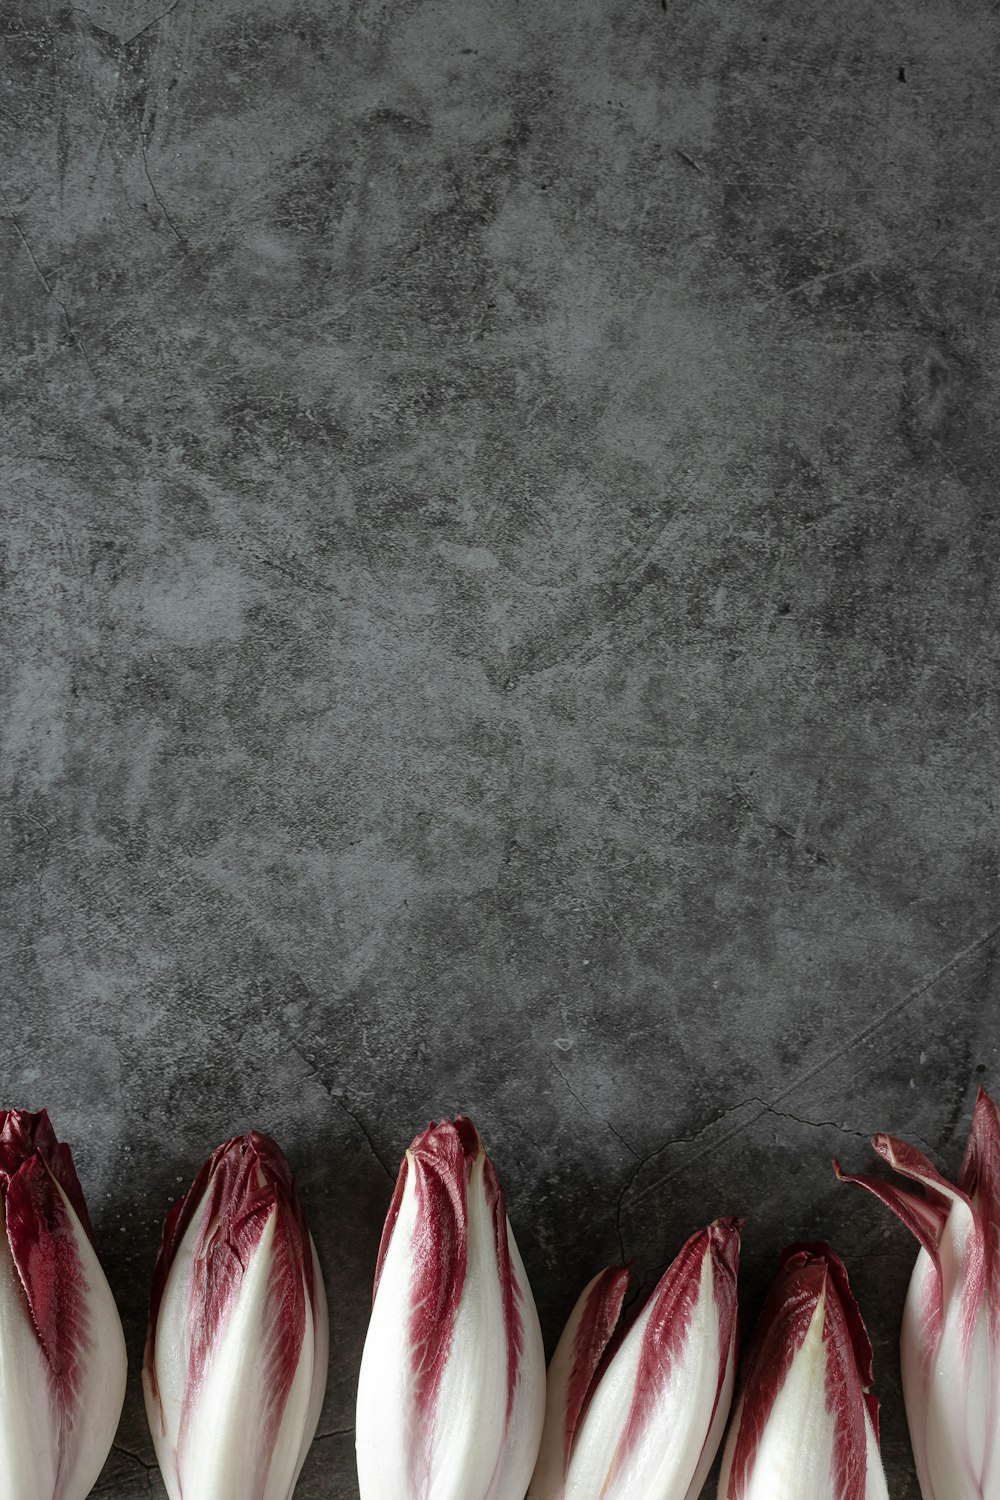 red and white textile on gray concrete floor